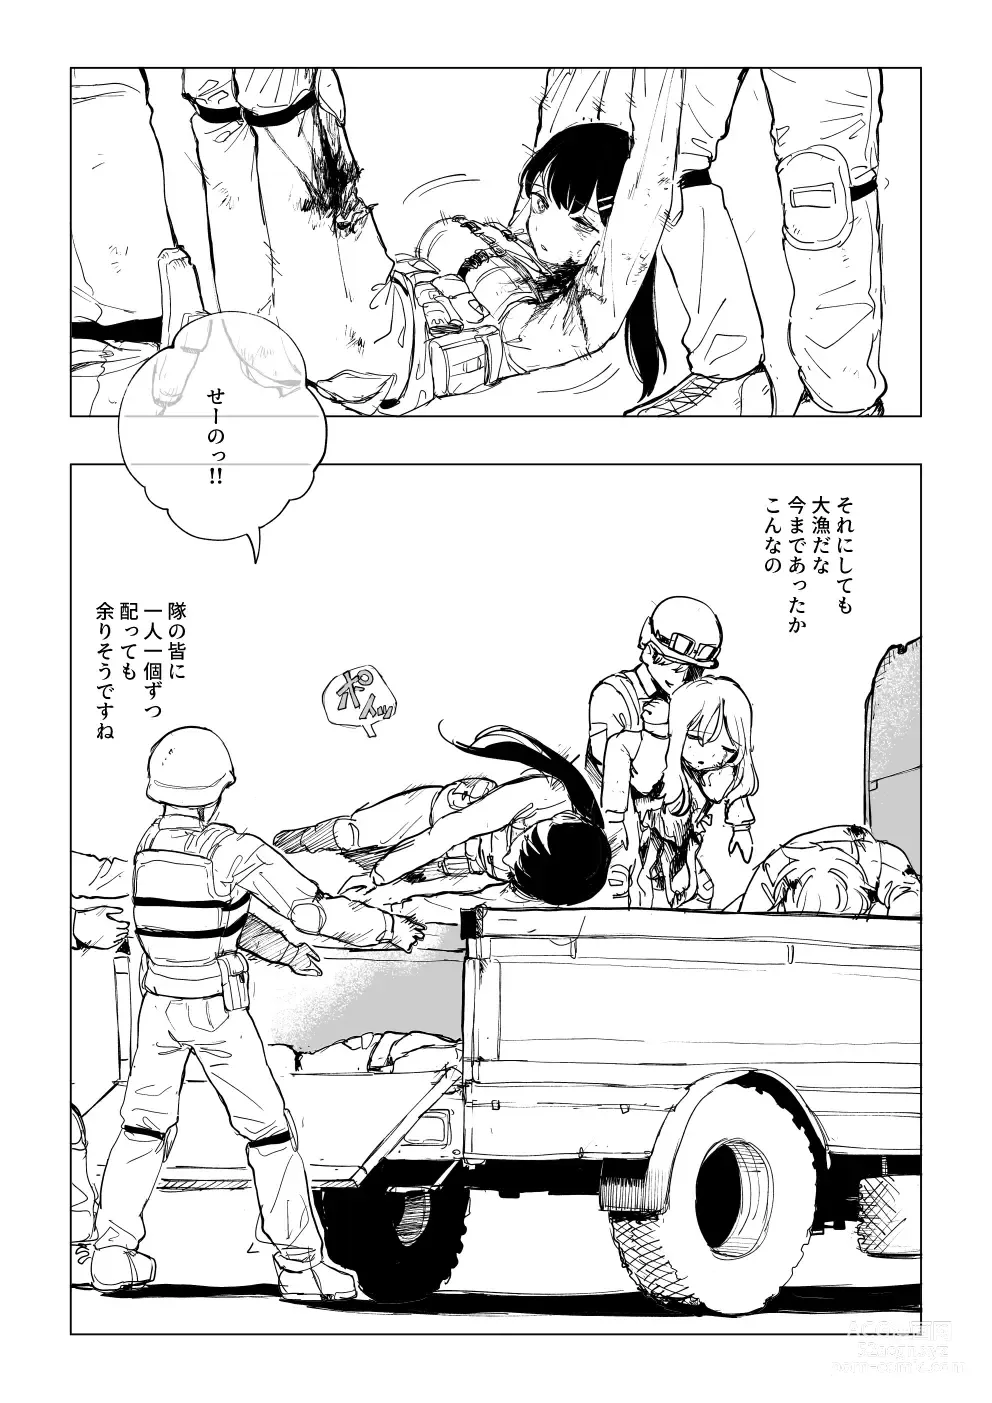 Page 2 of doujinshi Fallen on the Battlefield - The Aftermath